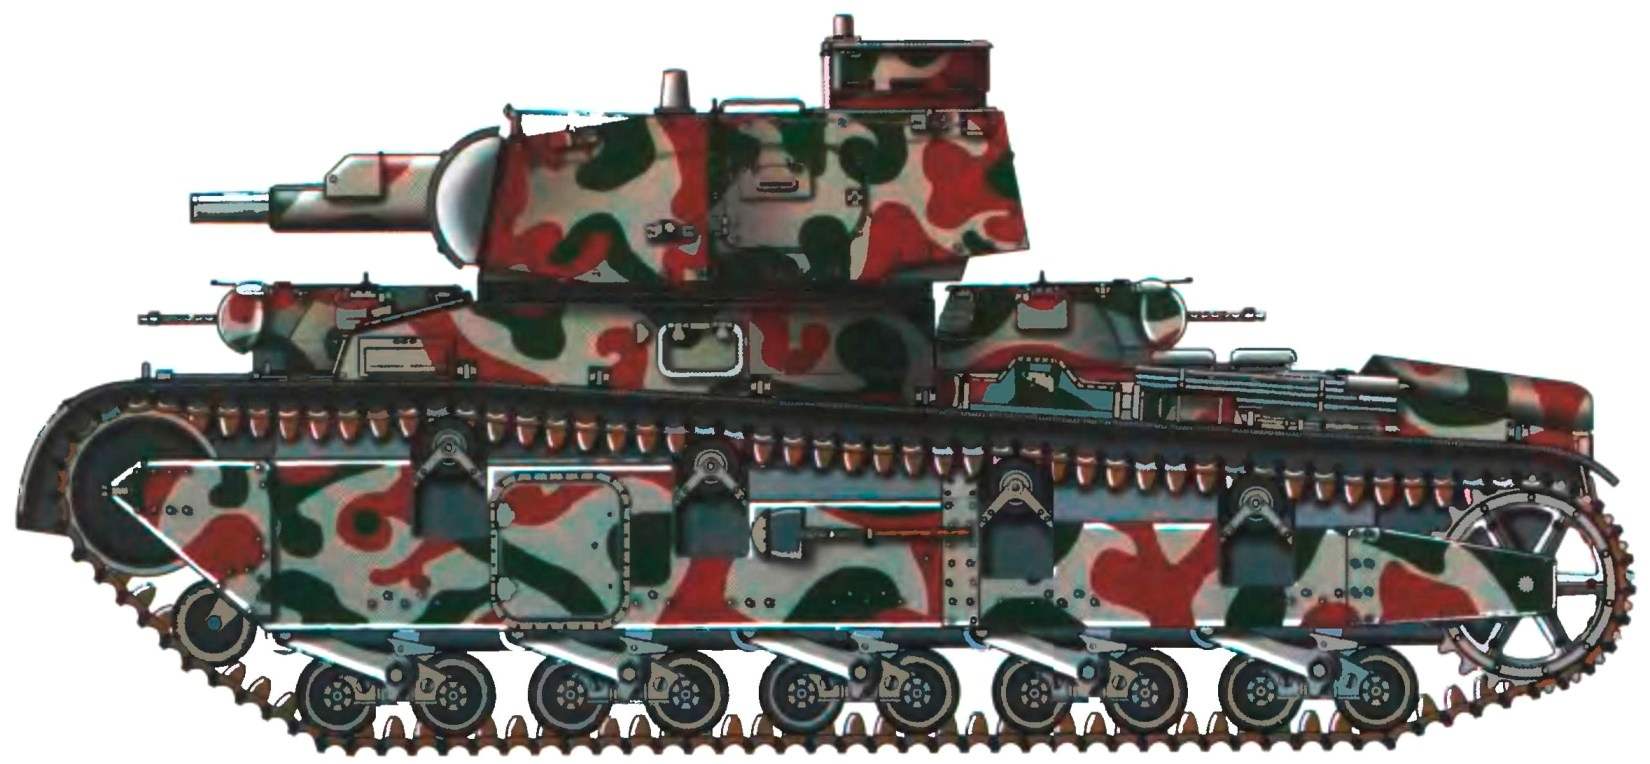 The second prototype of a tank Nb.Fz. in camouflage color as of 1938